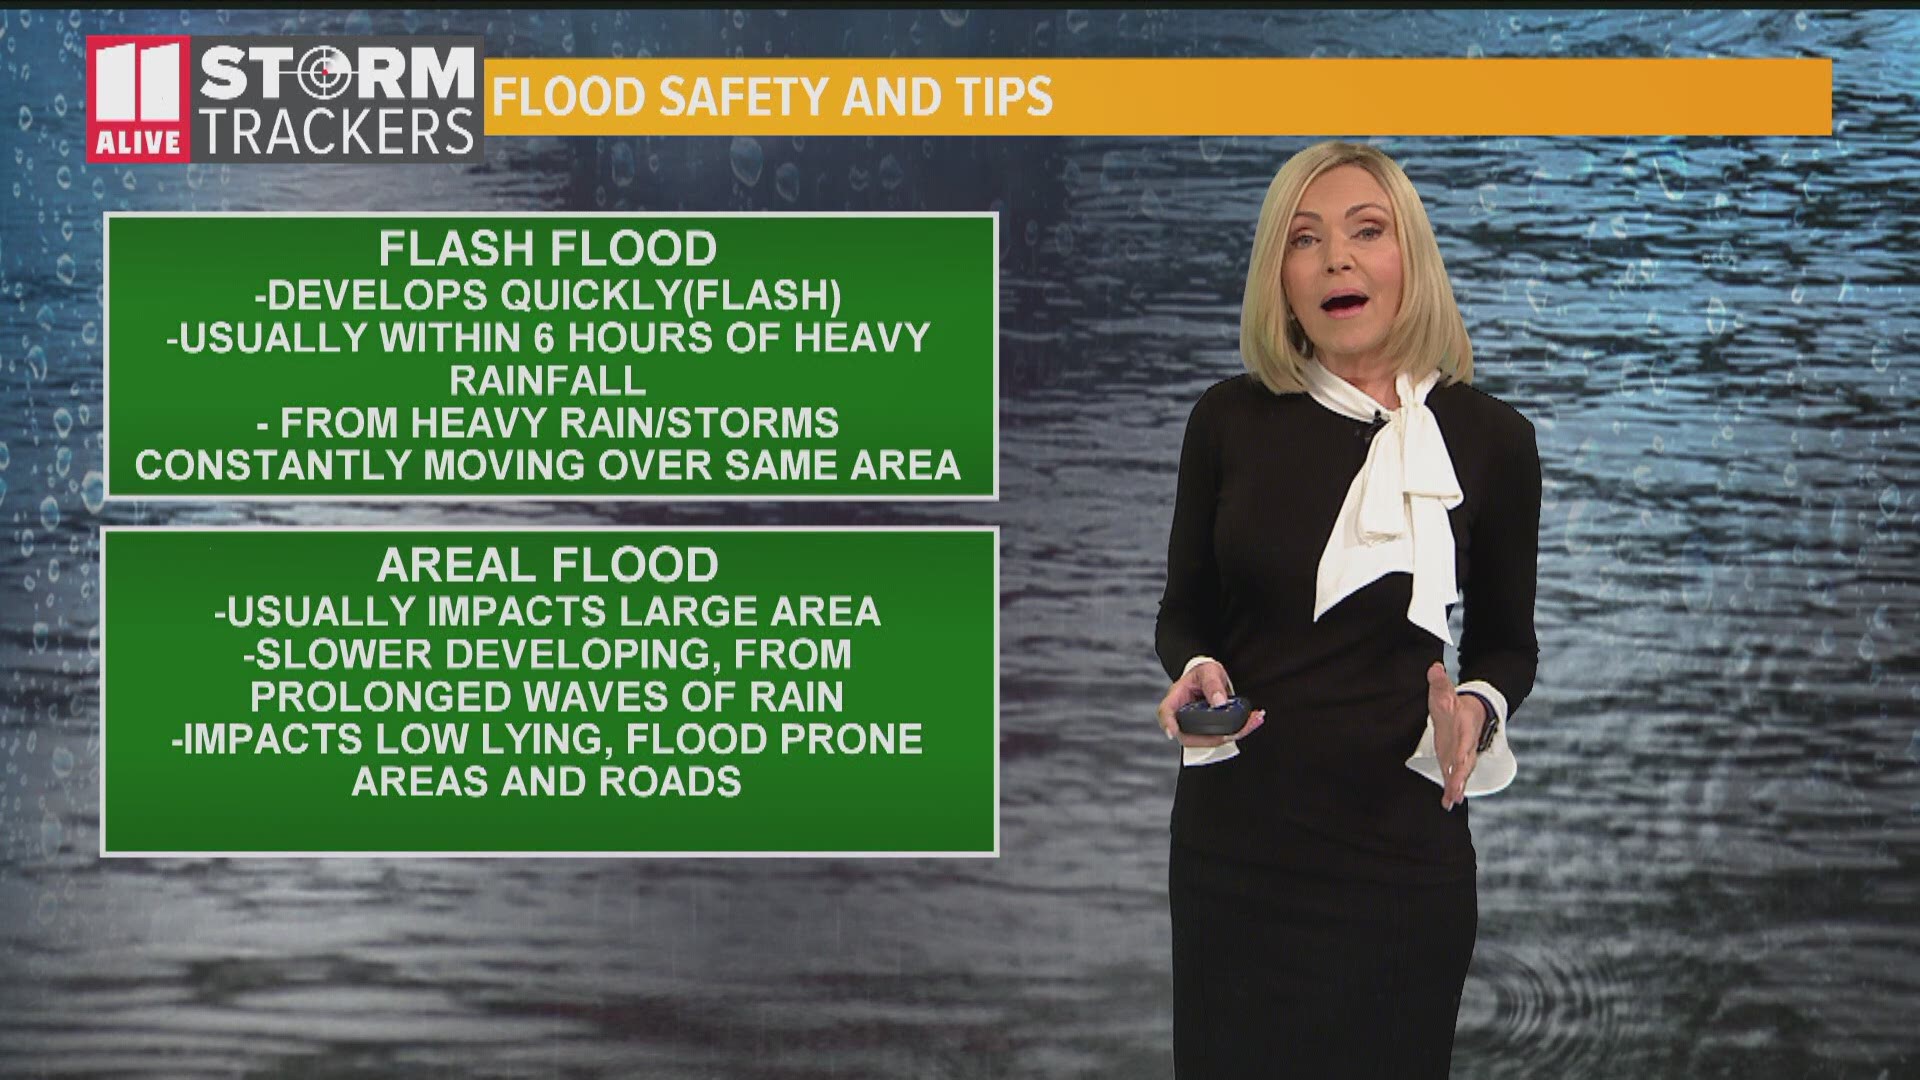 Flooding is the #1 weather-related killer in the US every year. Remember to 'turn around, don't drown'. Do not drive on a flooded road.